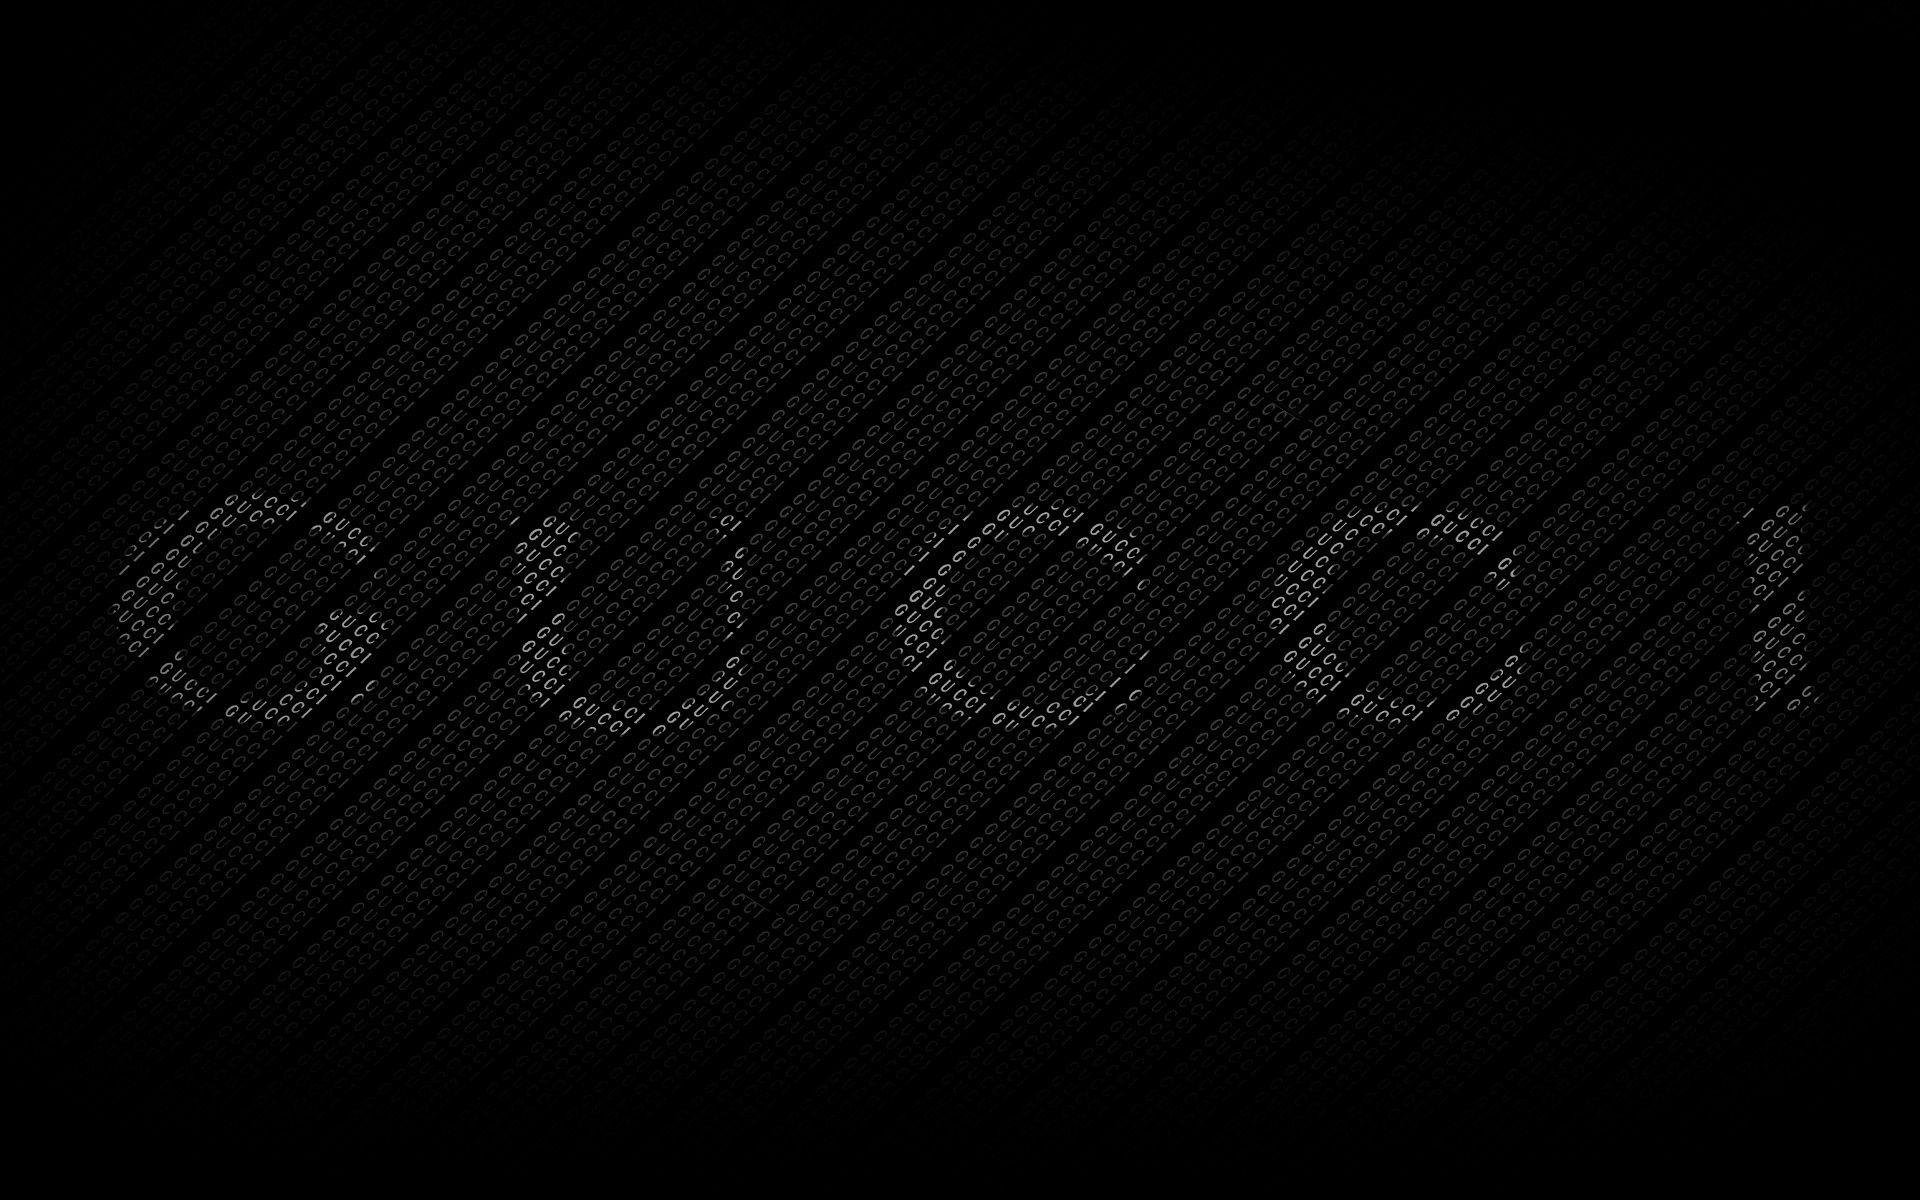 Gucci wallpapers for Apple devices, Stylish design, High resolution, Trendy backgrounds, 1920x1200 HD Desktop